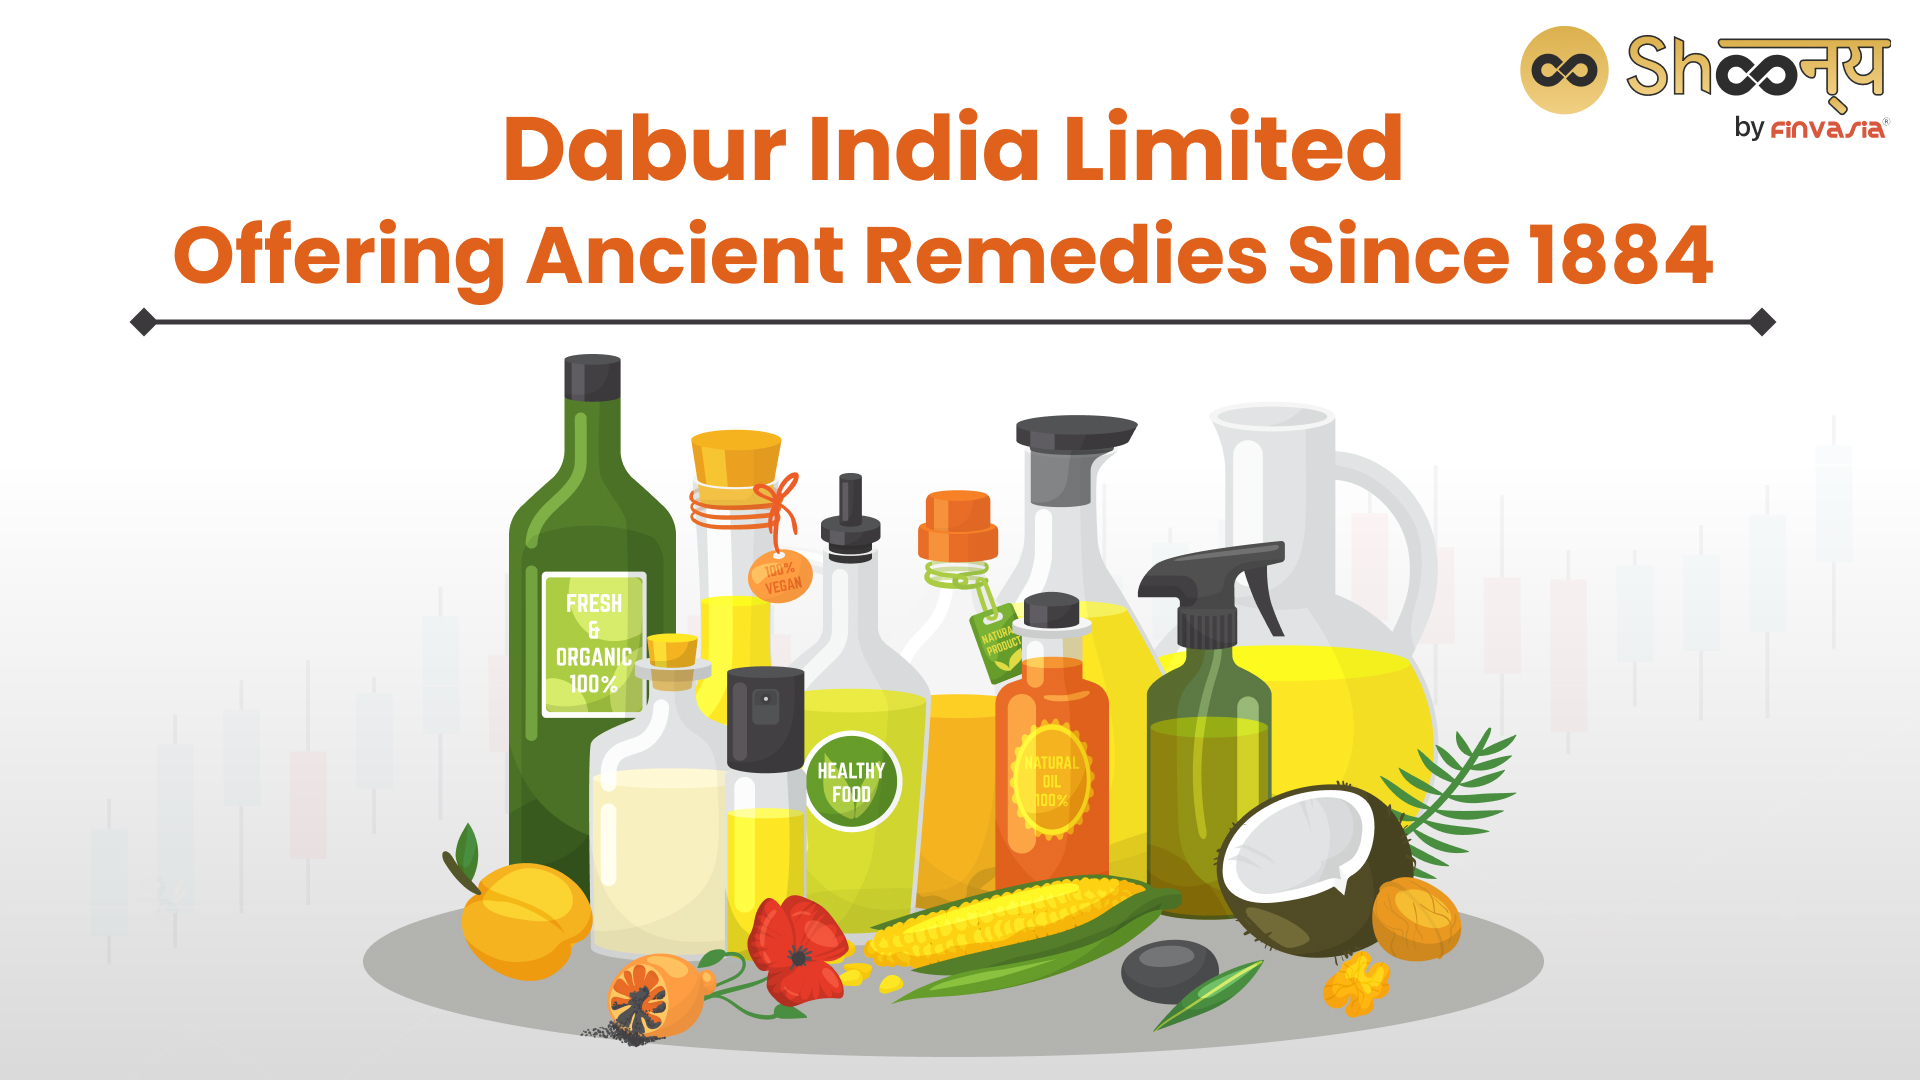 History of Dabur India Limited| Founder, Brands, and Growth Story